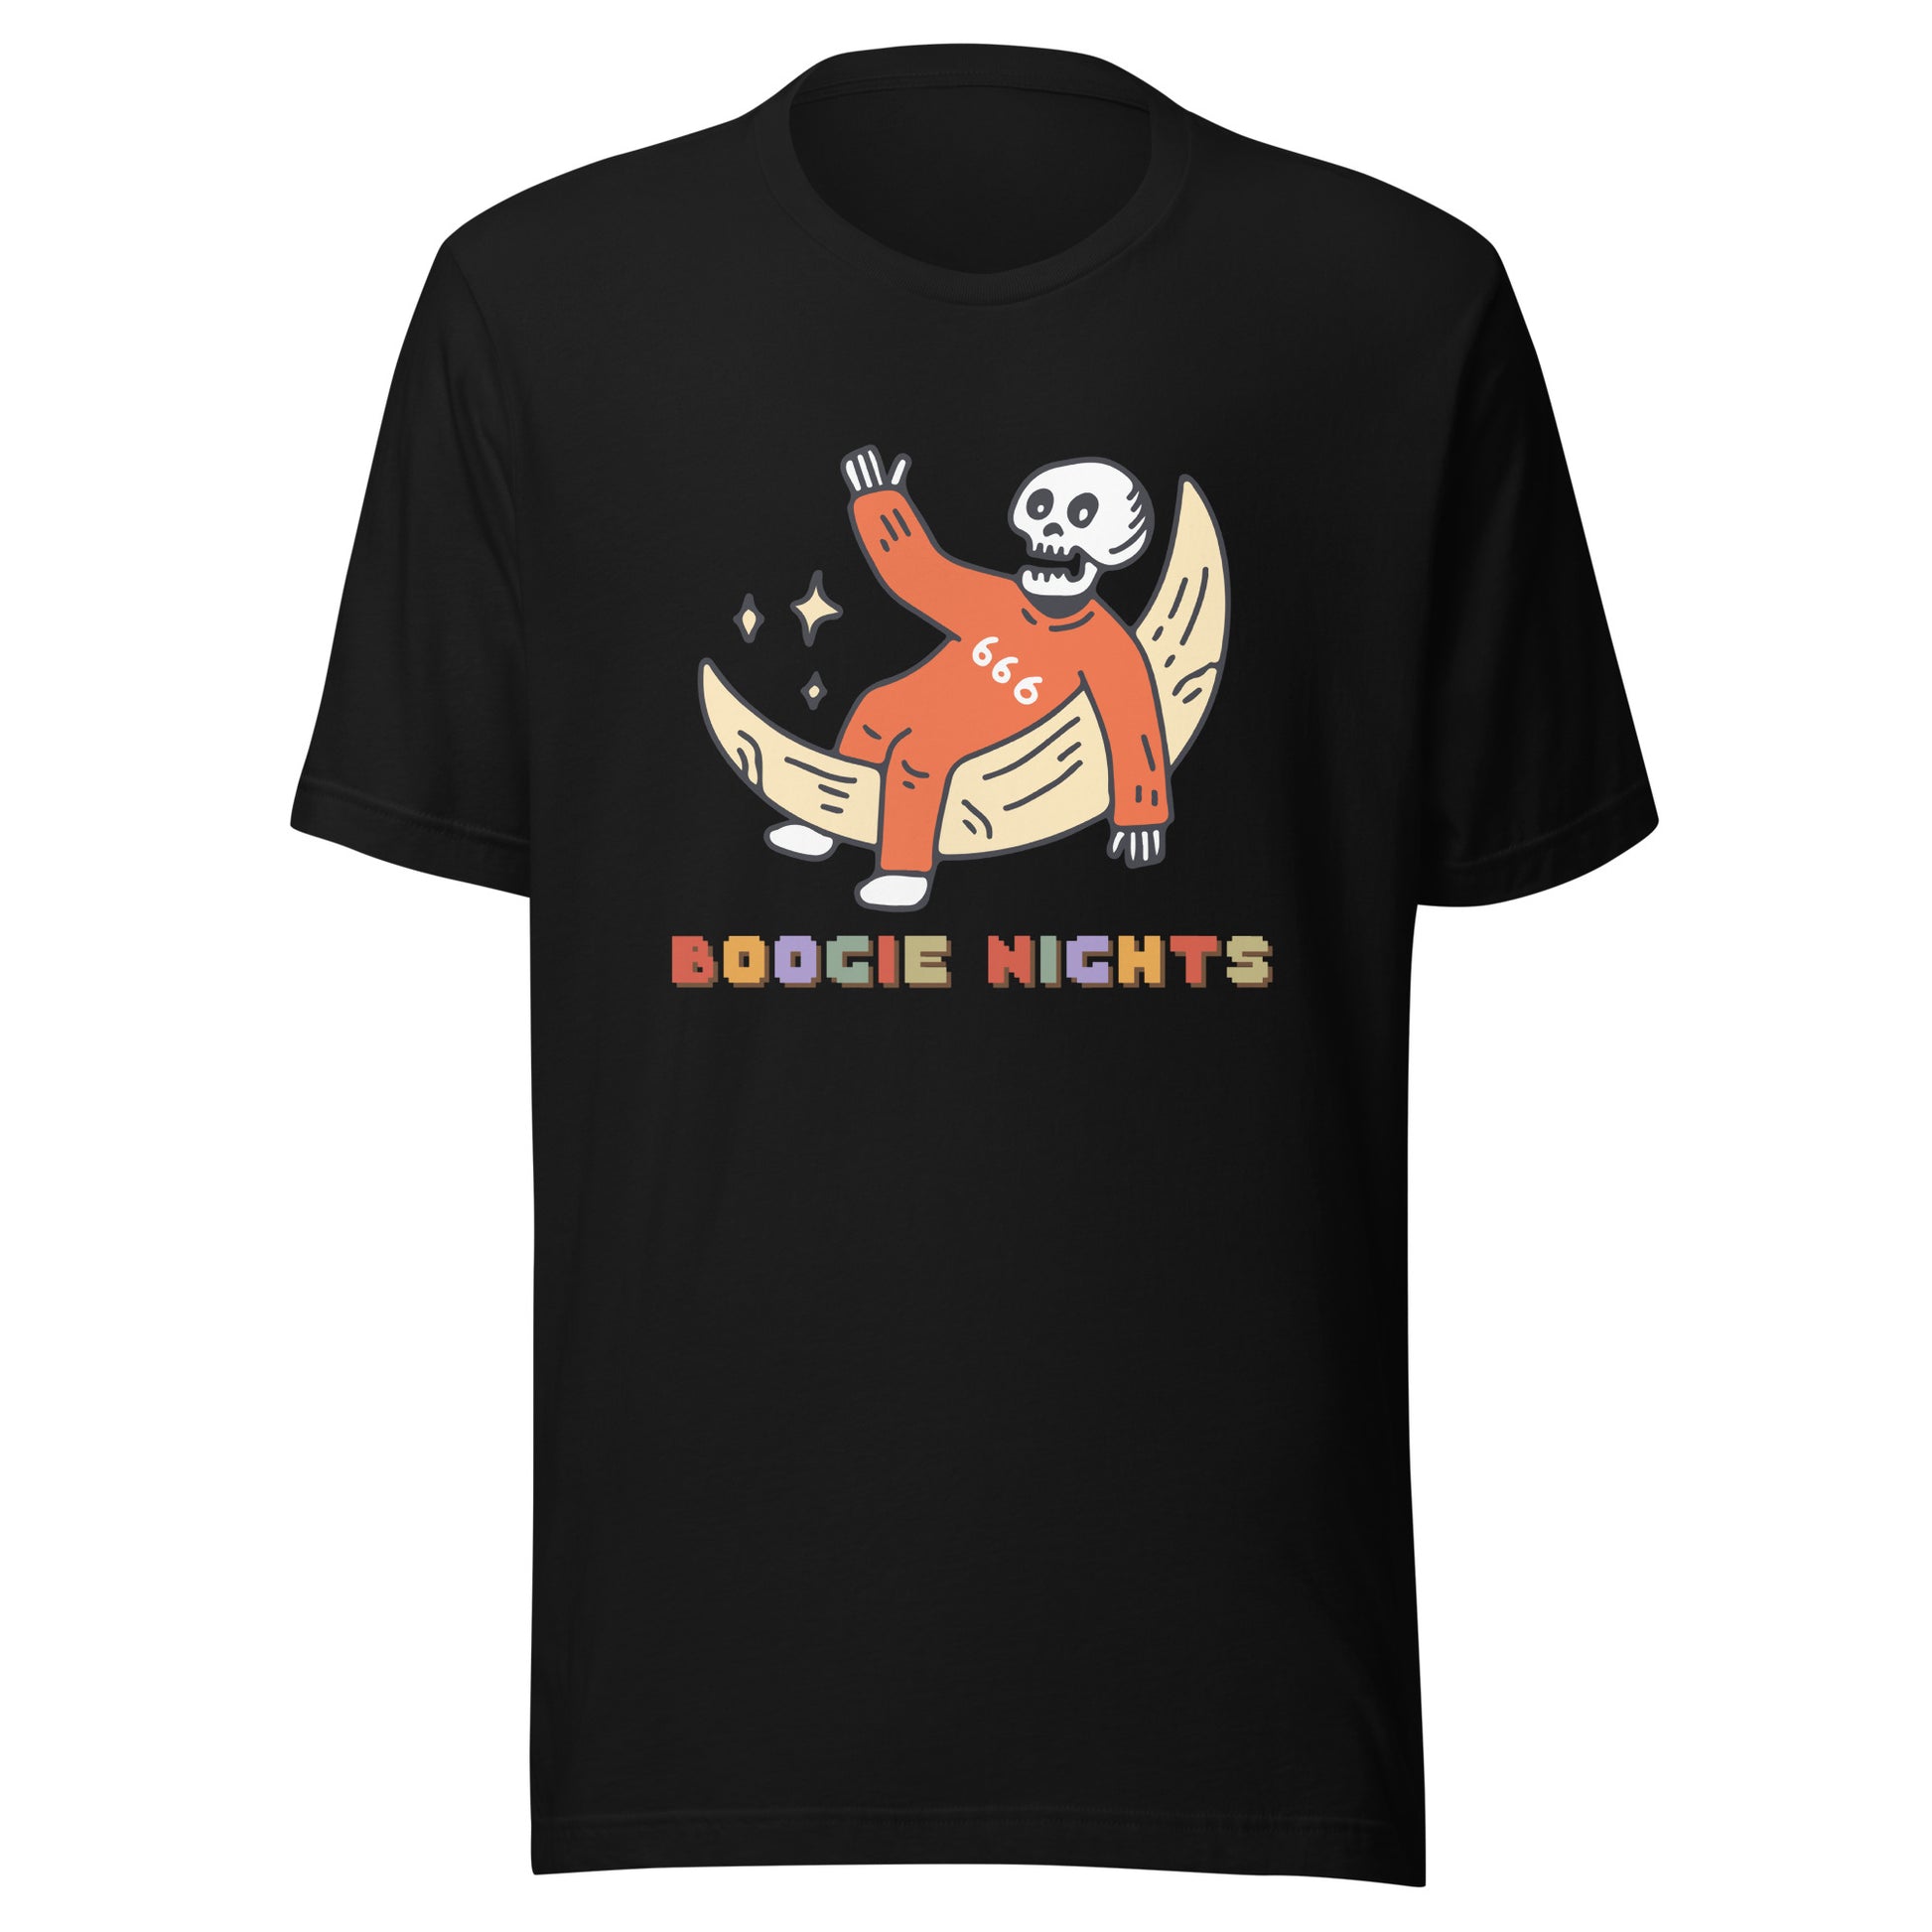 Boogie Nights Unisex T-Shirt - Groove in Style with Retro Vibes